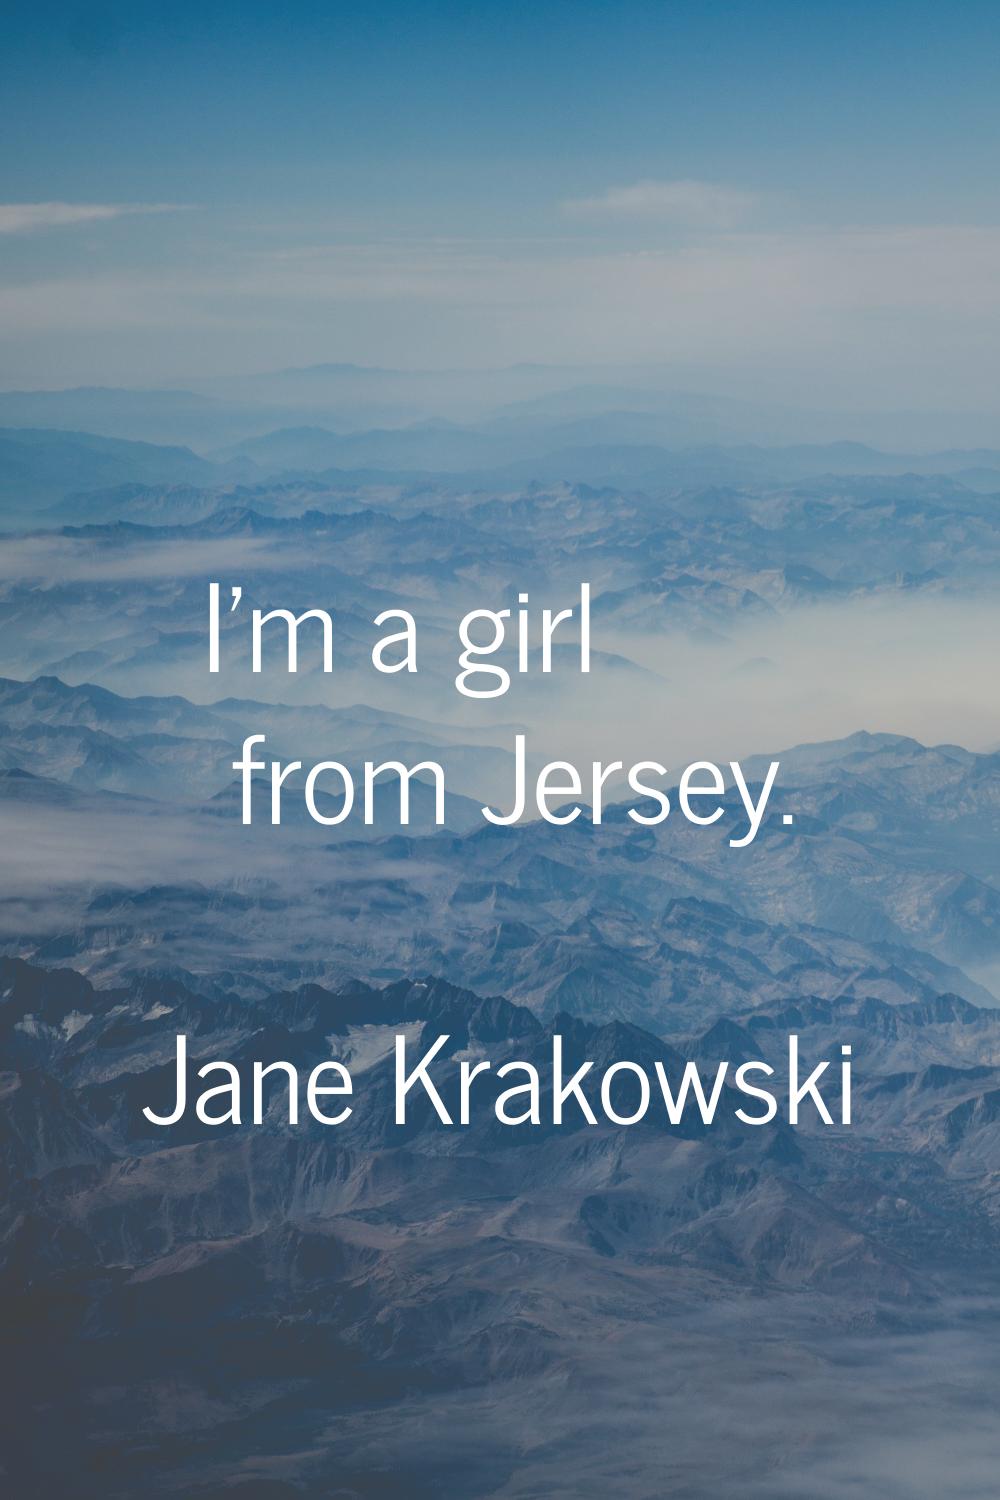 I'm a girl from Jersey.